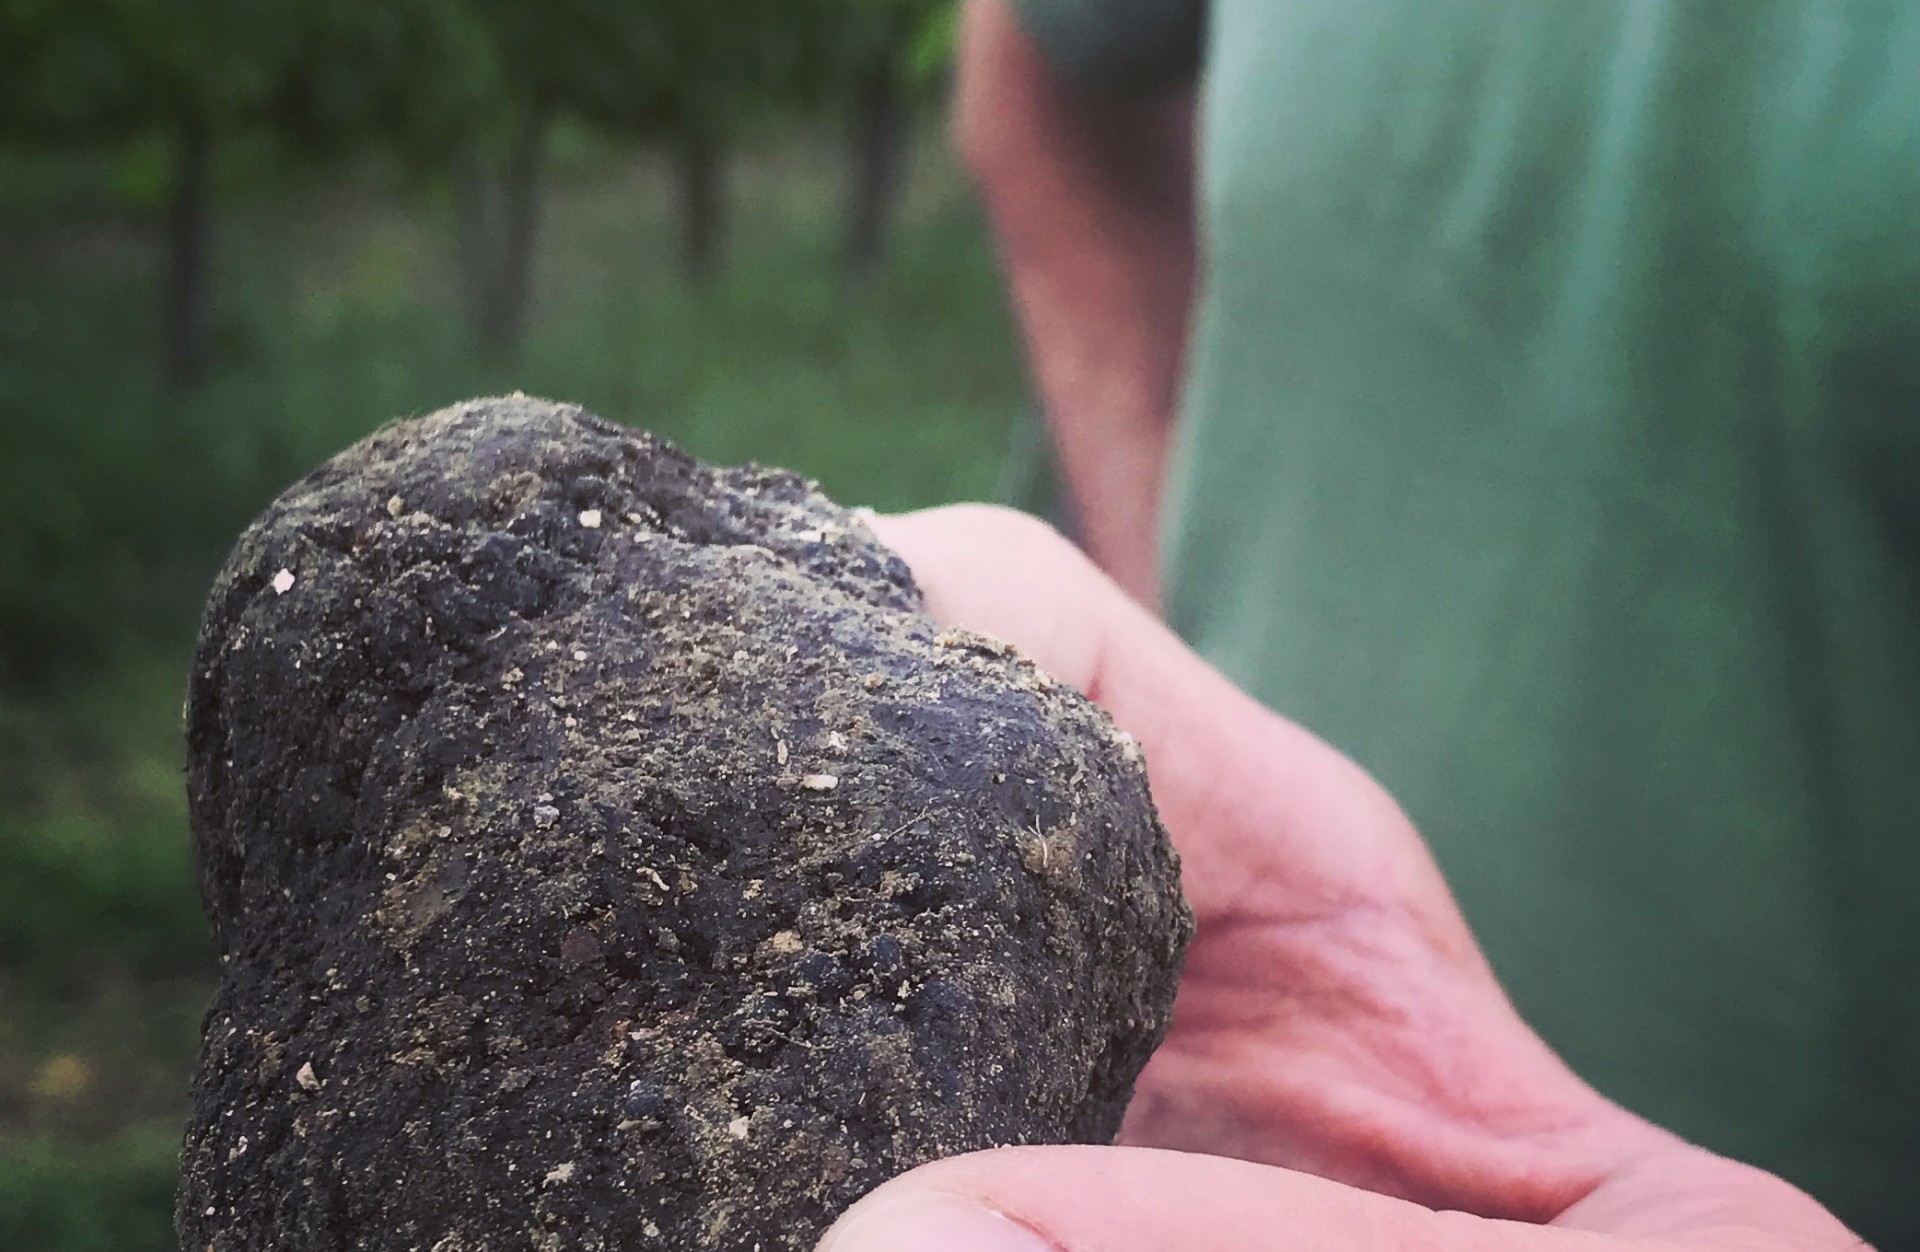 The Black truffle: from the pit to the table